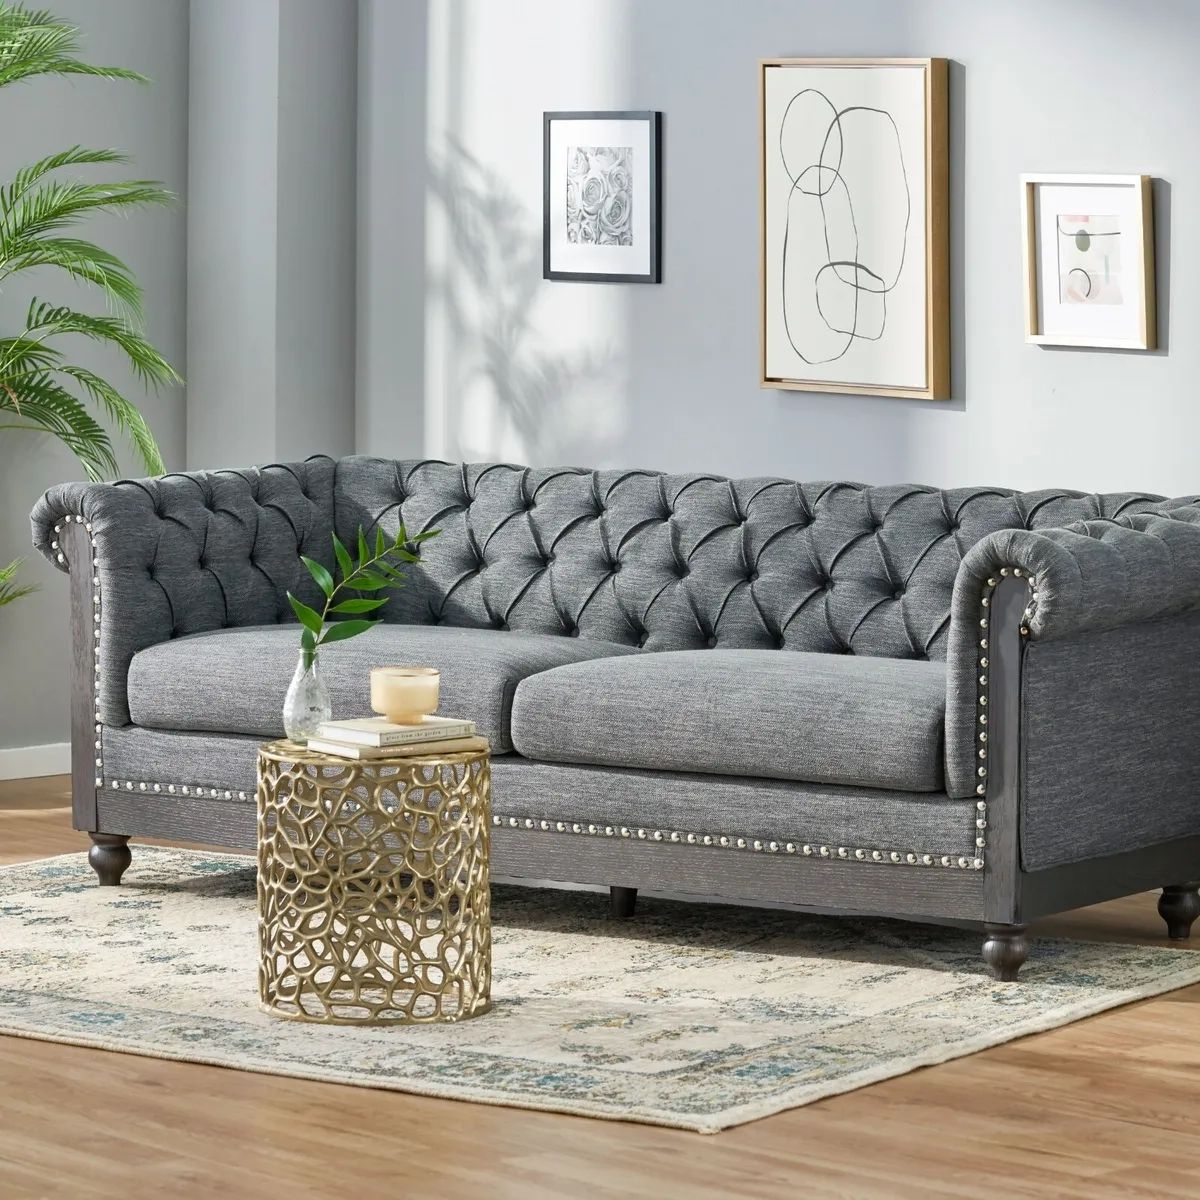 Kinzie Chesterfield Tufted Fabric 3 Seater Sofa With Nailhead Trim | Ebay Intended For Sofas With Nailhead Trim (Photo 9 of 15)